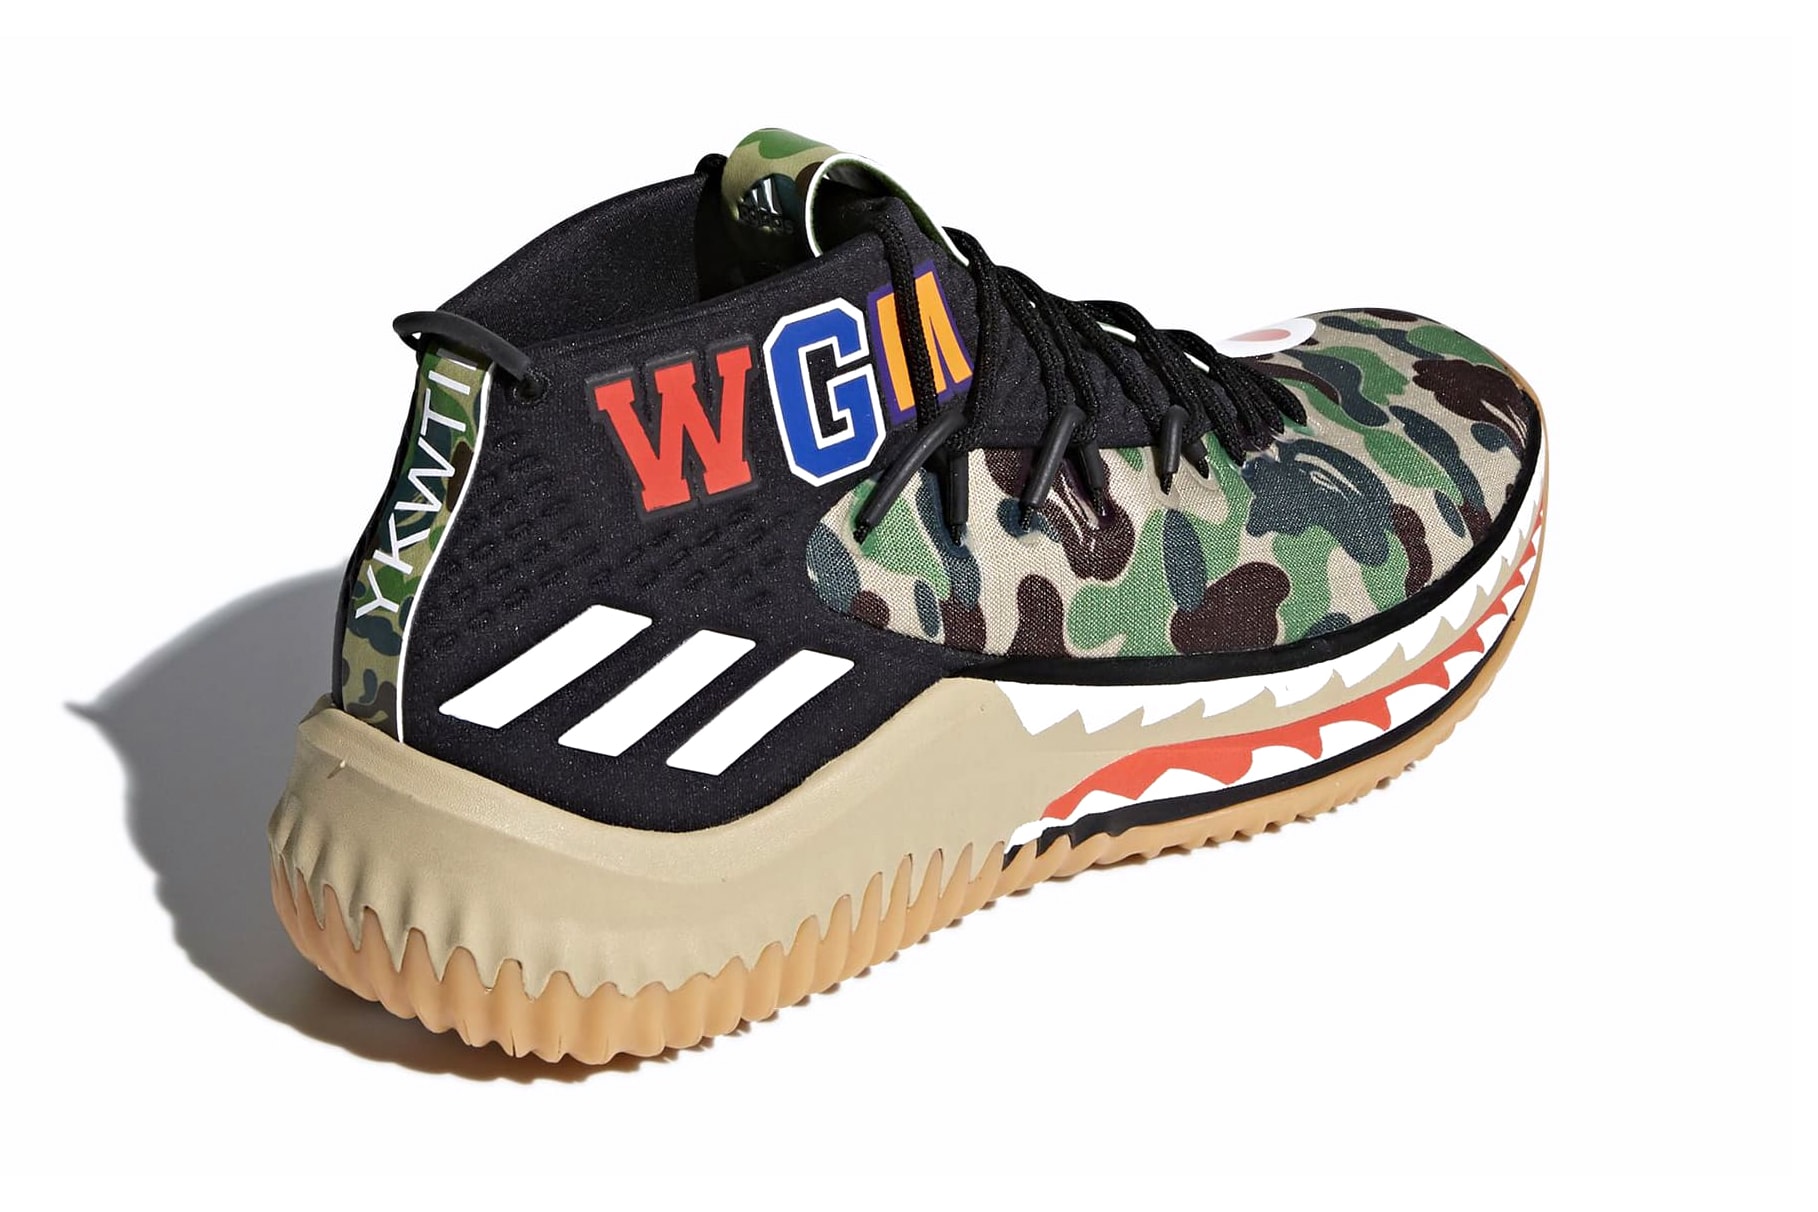 BAPE adidas Dame 4 Green Black Camo Camouflage 2018 Release Date Info Sneakers Shoes Footwear